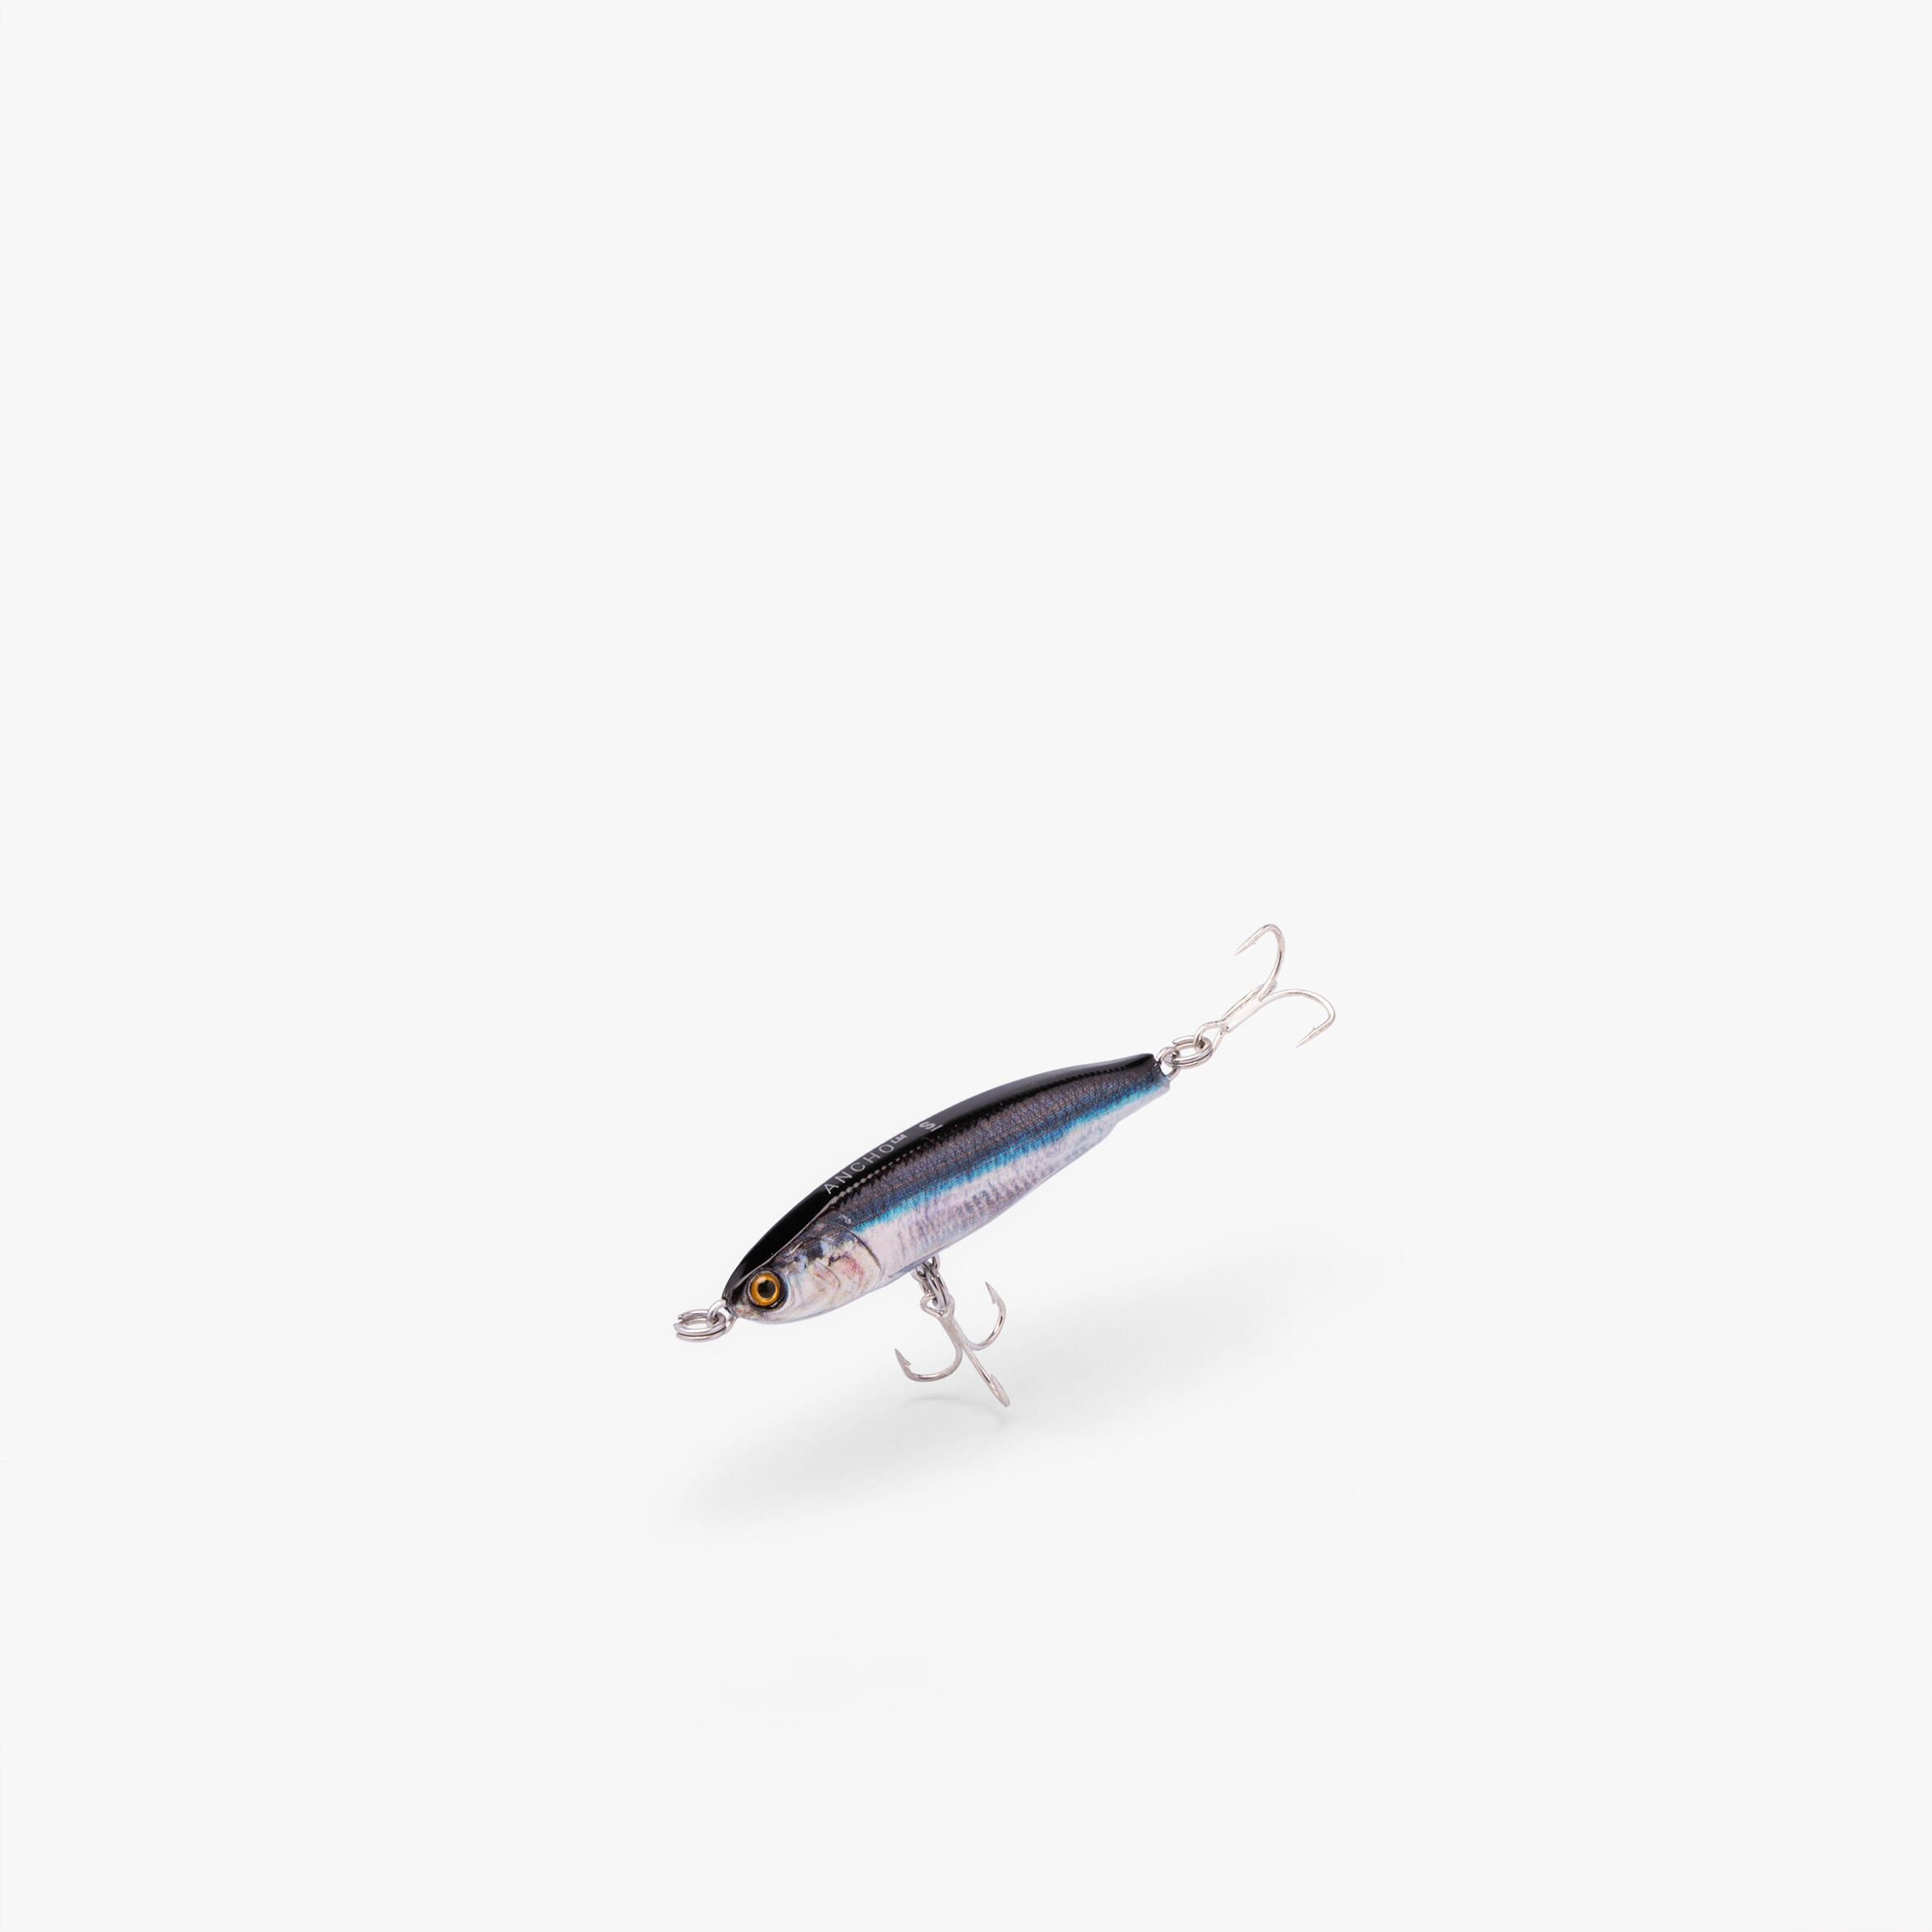 Plug Bait lipless minnow ANCHO LM 60 Anchovy 2/5